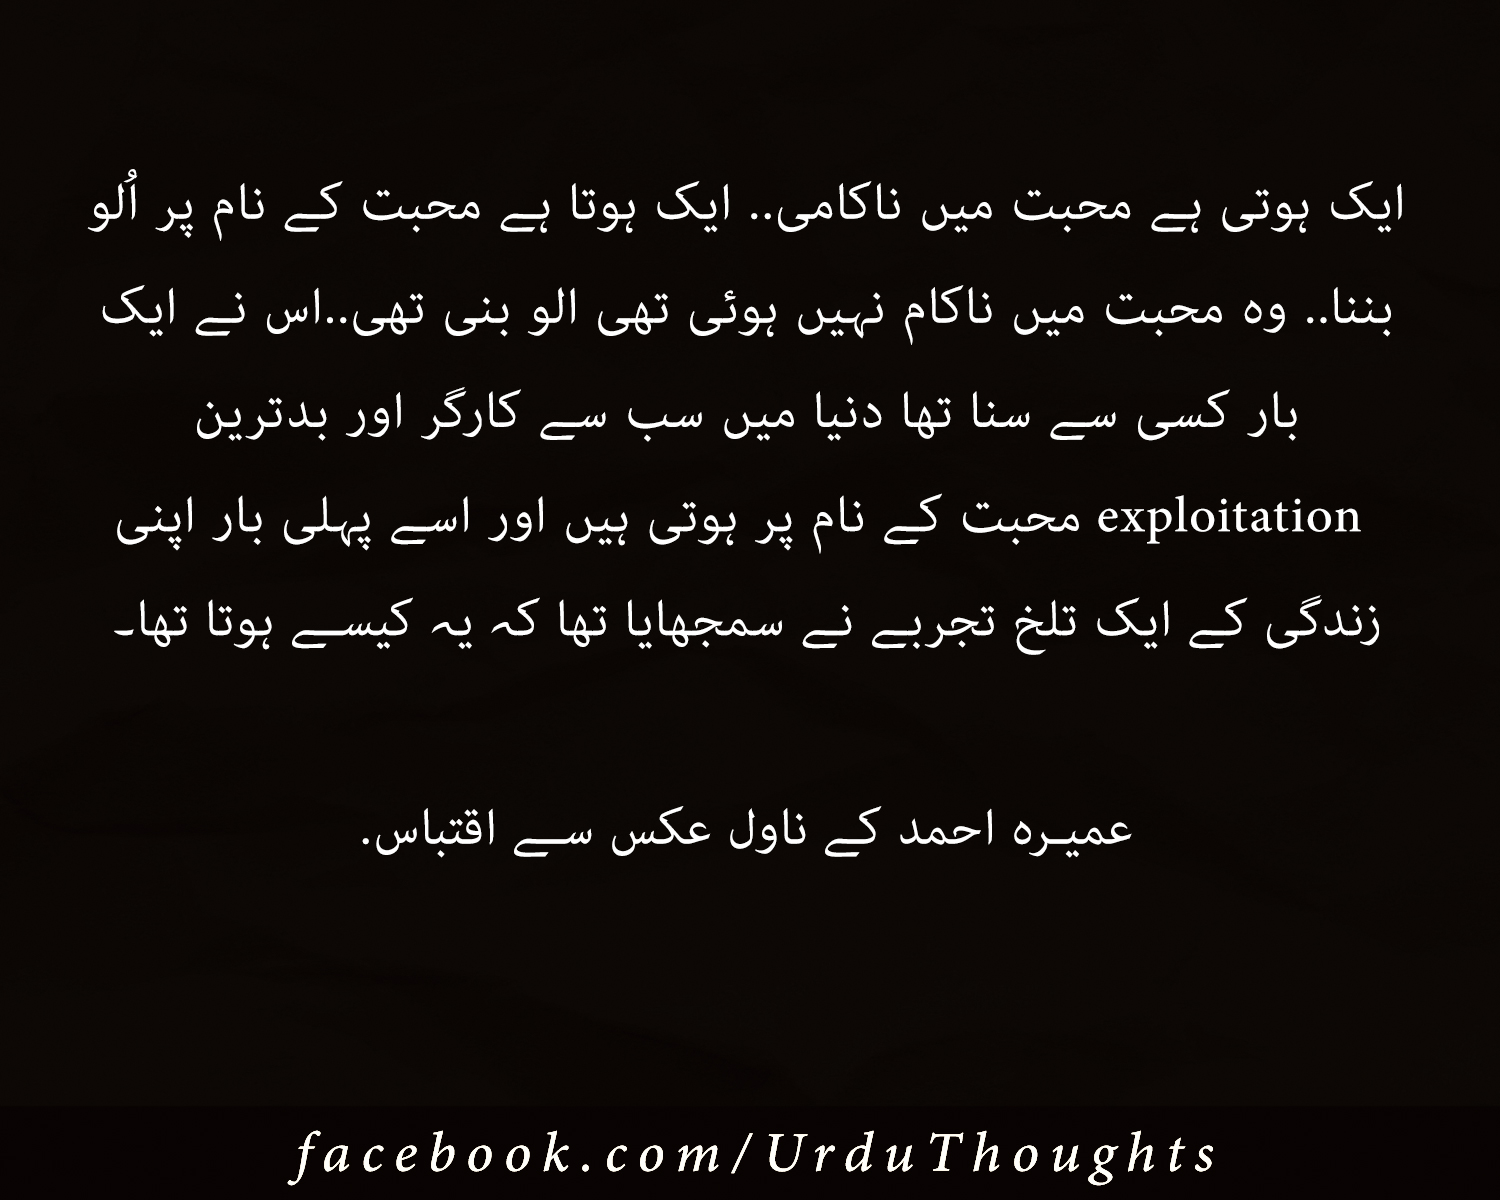 Famous Urdu Quotes With Beautiful Images Design | Urdu Thoughts